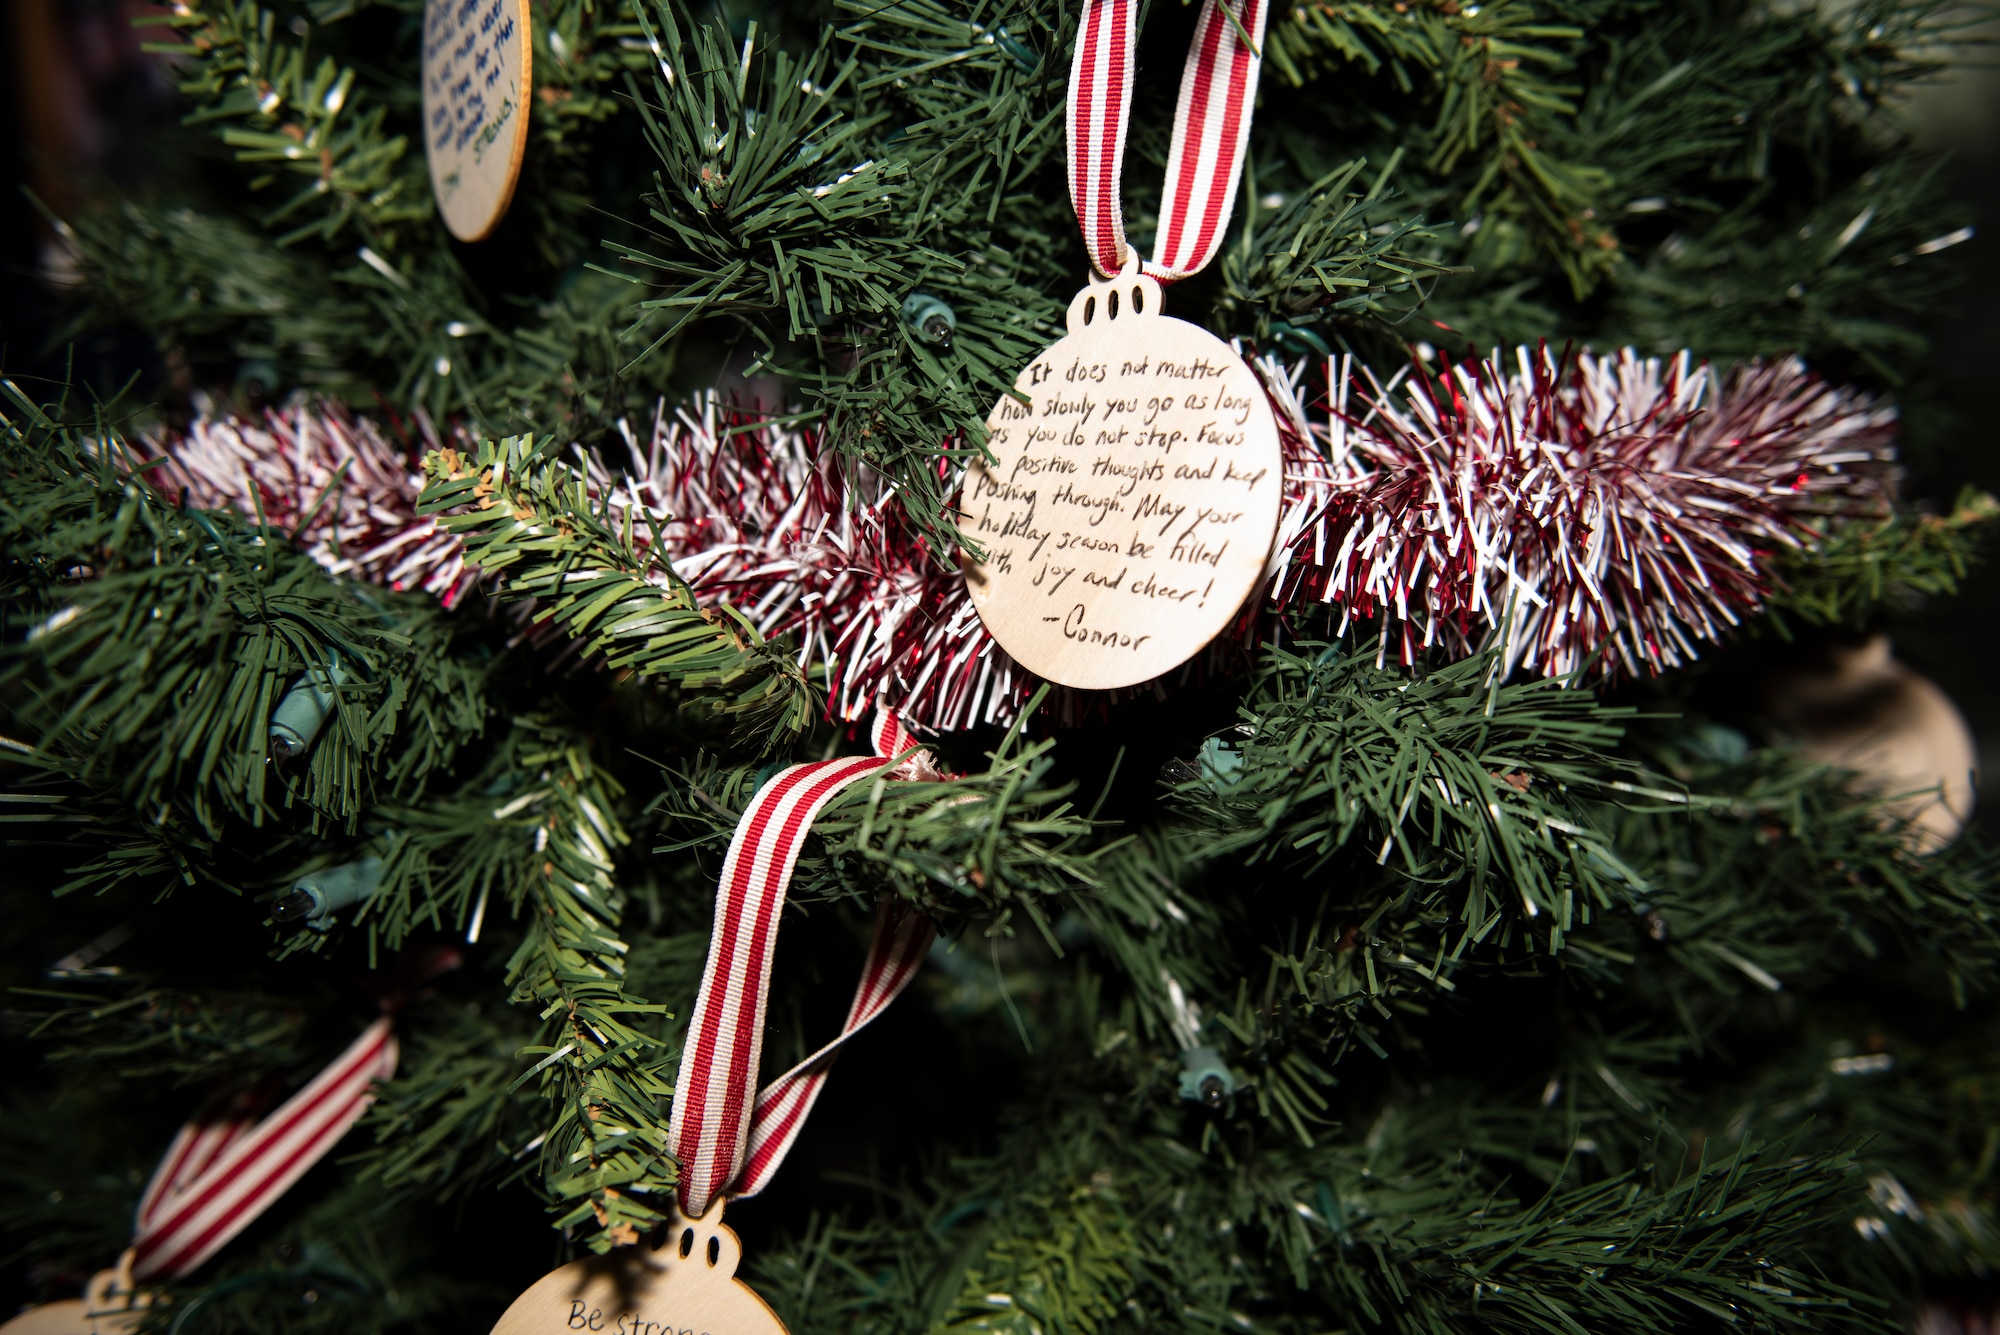 Handwritten messages of positivity and hope hang on a tree in the lobby of the 48th Communications Squadron at Royal Air Force Lakenheath, England, Dec. 16, 2020. The tree was a part of a warm clothing donation drive for a local community homeless shelter. (U.S. Air Force photo by Airman 1st Class Jessi Monte)